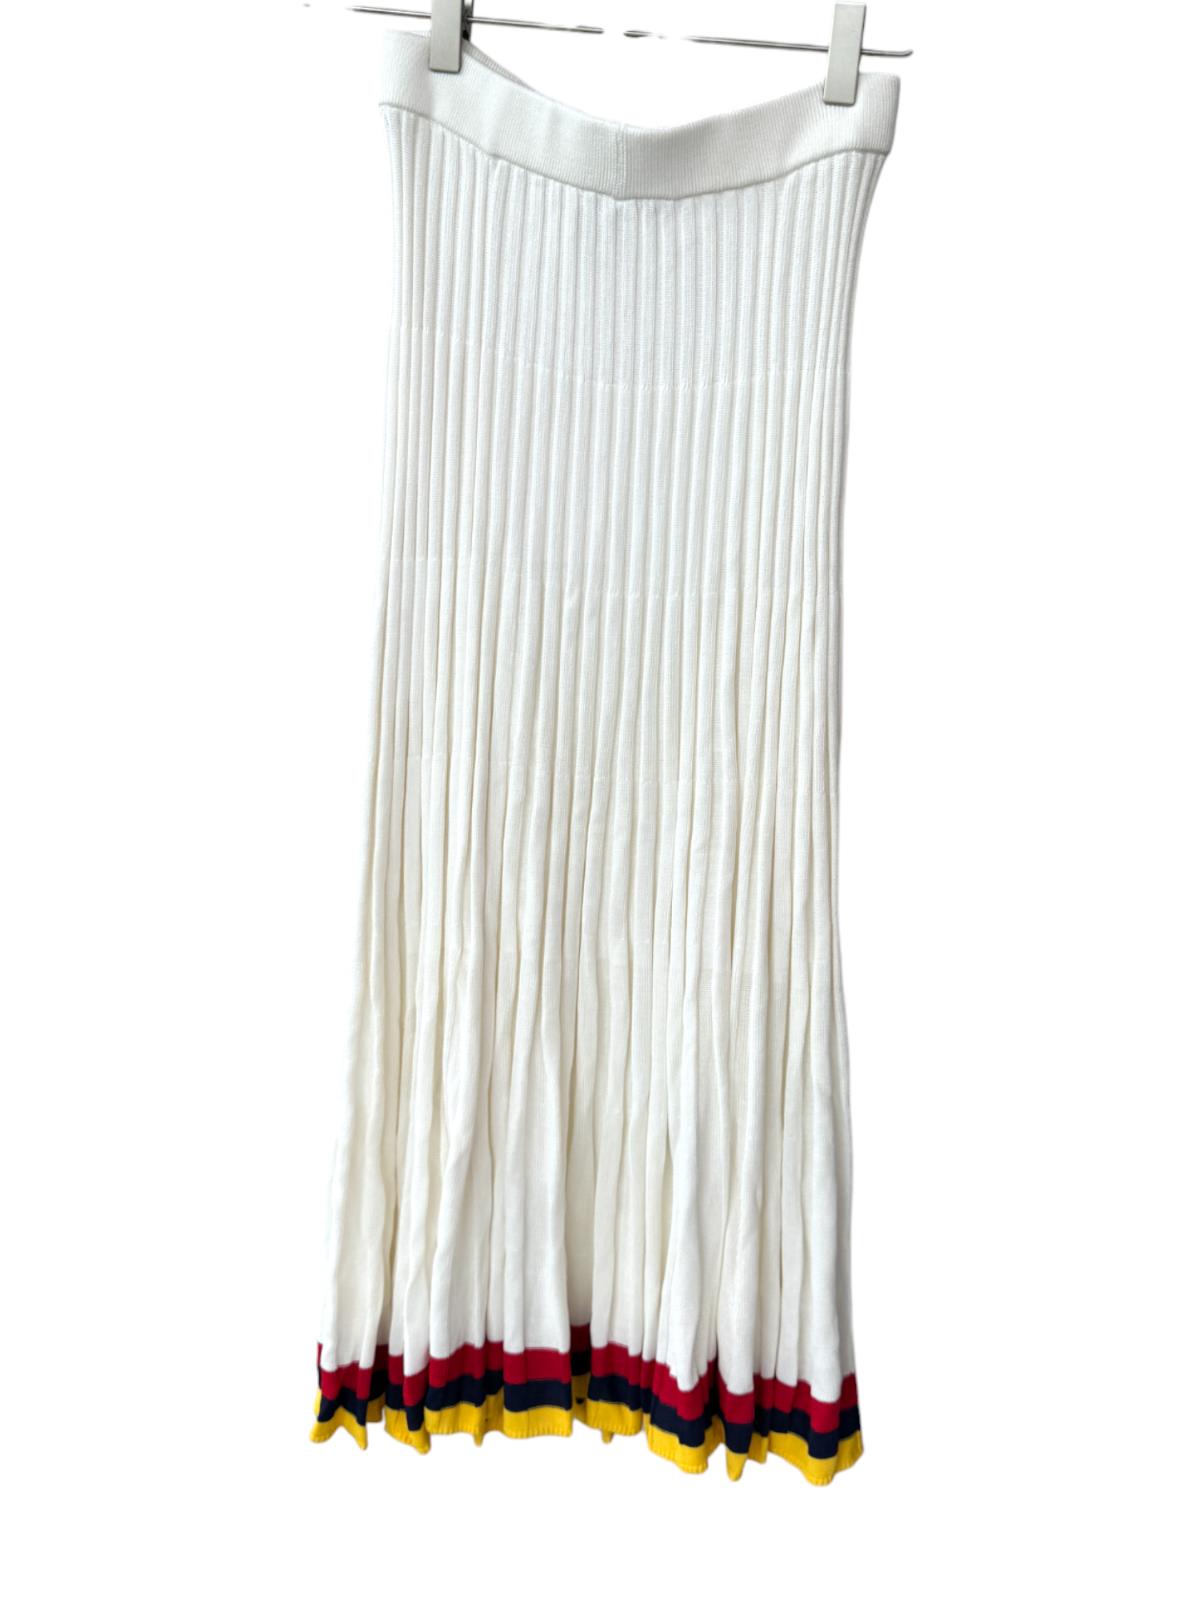 Zimmermann High Tide Pleated Midi Skirt | Stretch, Knit, white/yellow/red/black